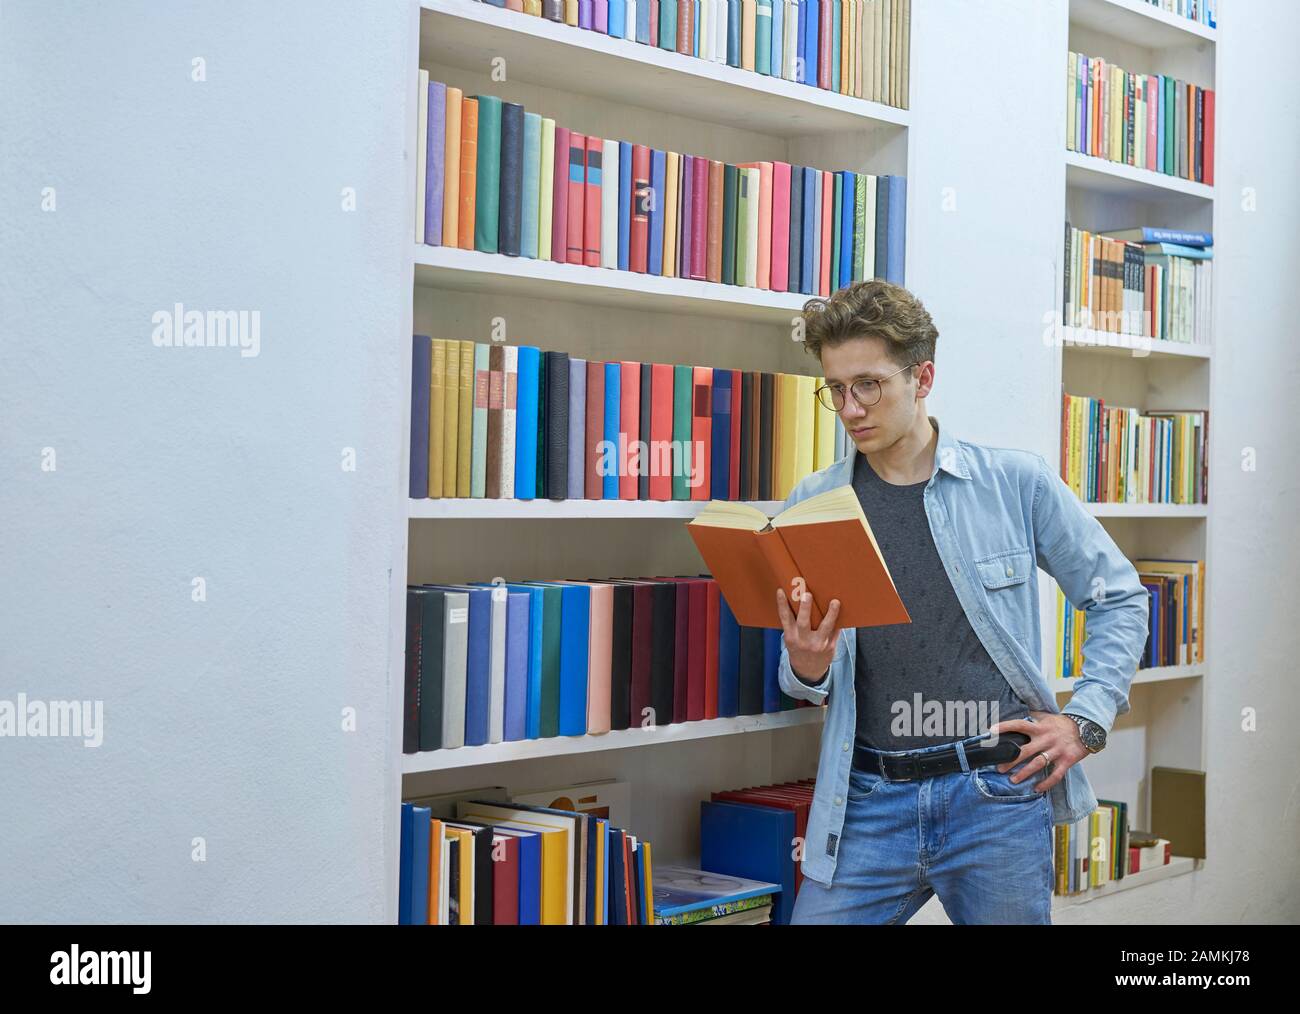 Young man reading a book while leaning on a bookshelf with colorful books in a library. Stock Photo